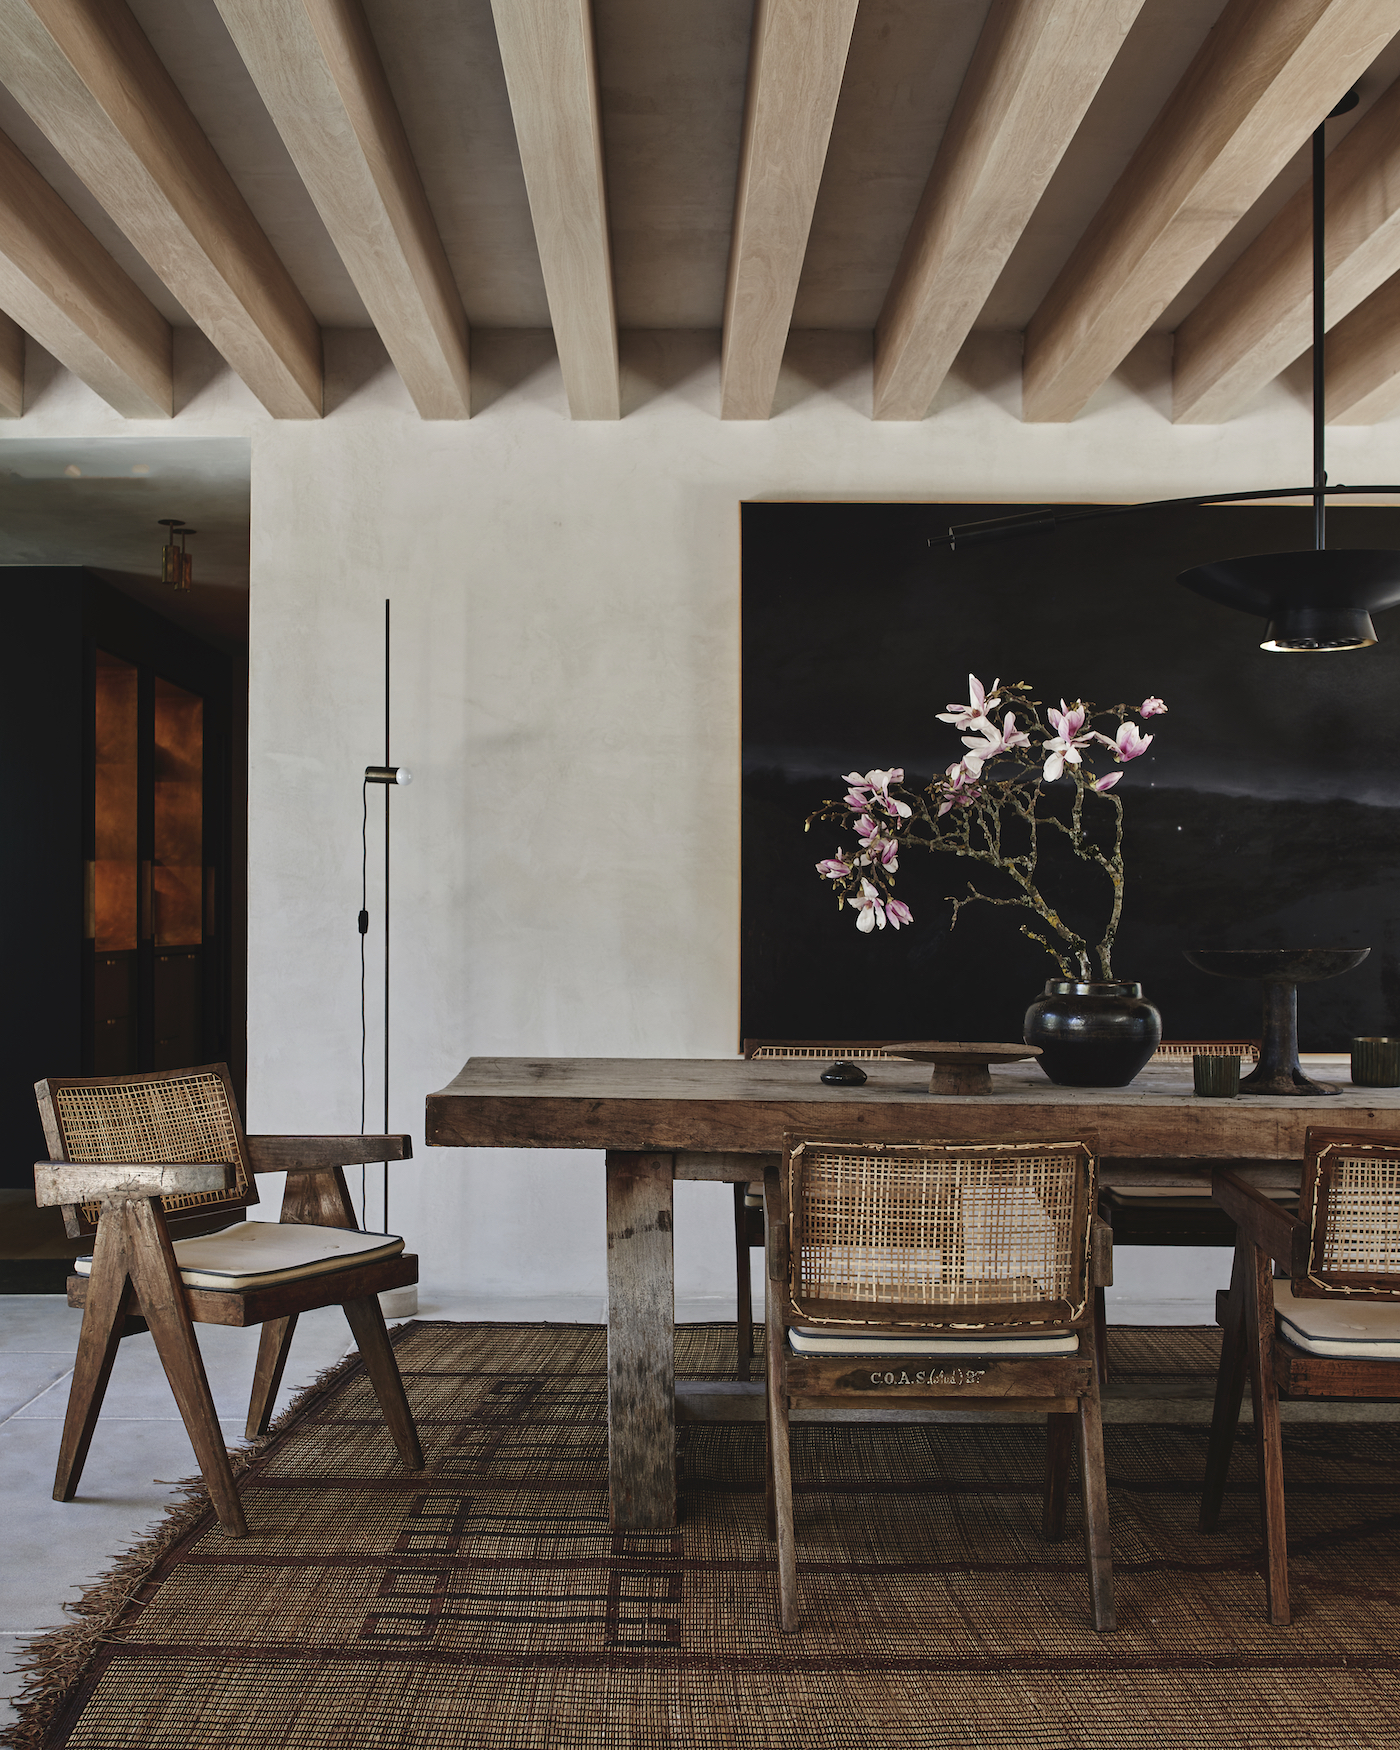 A dining room by interior designer Vanessa Alexander in her own Malibu residence in Effect Magazine